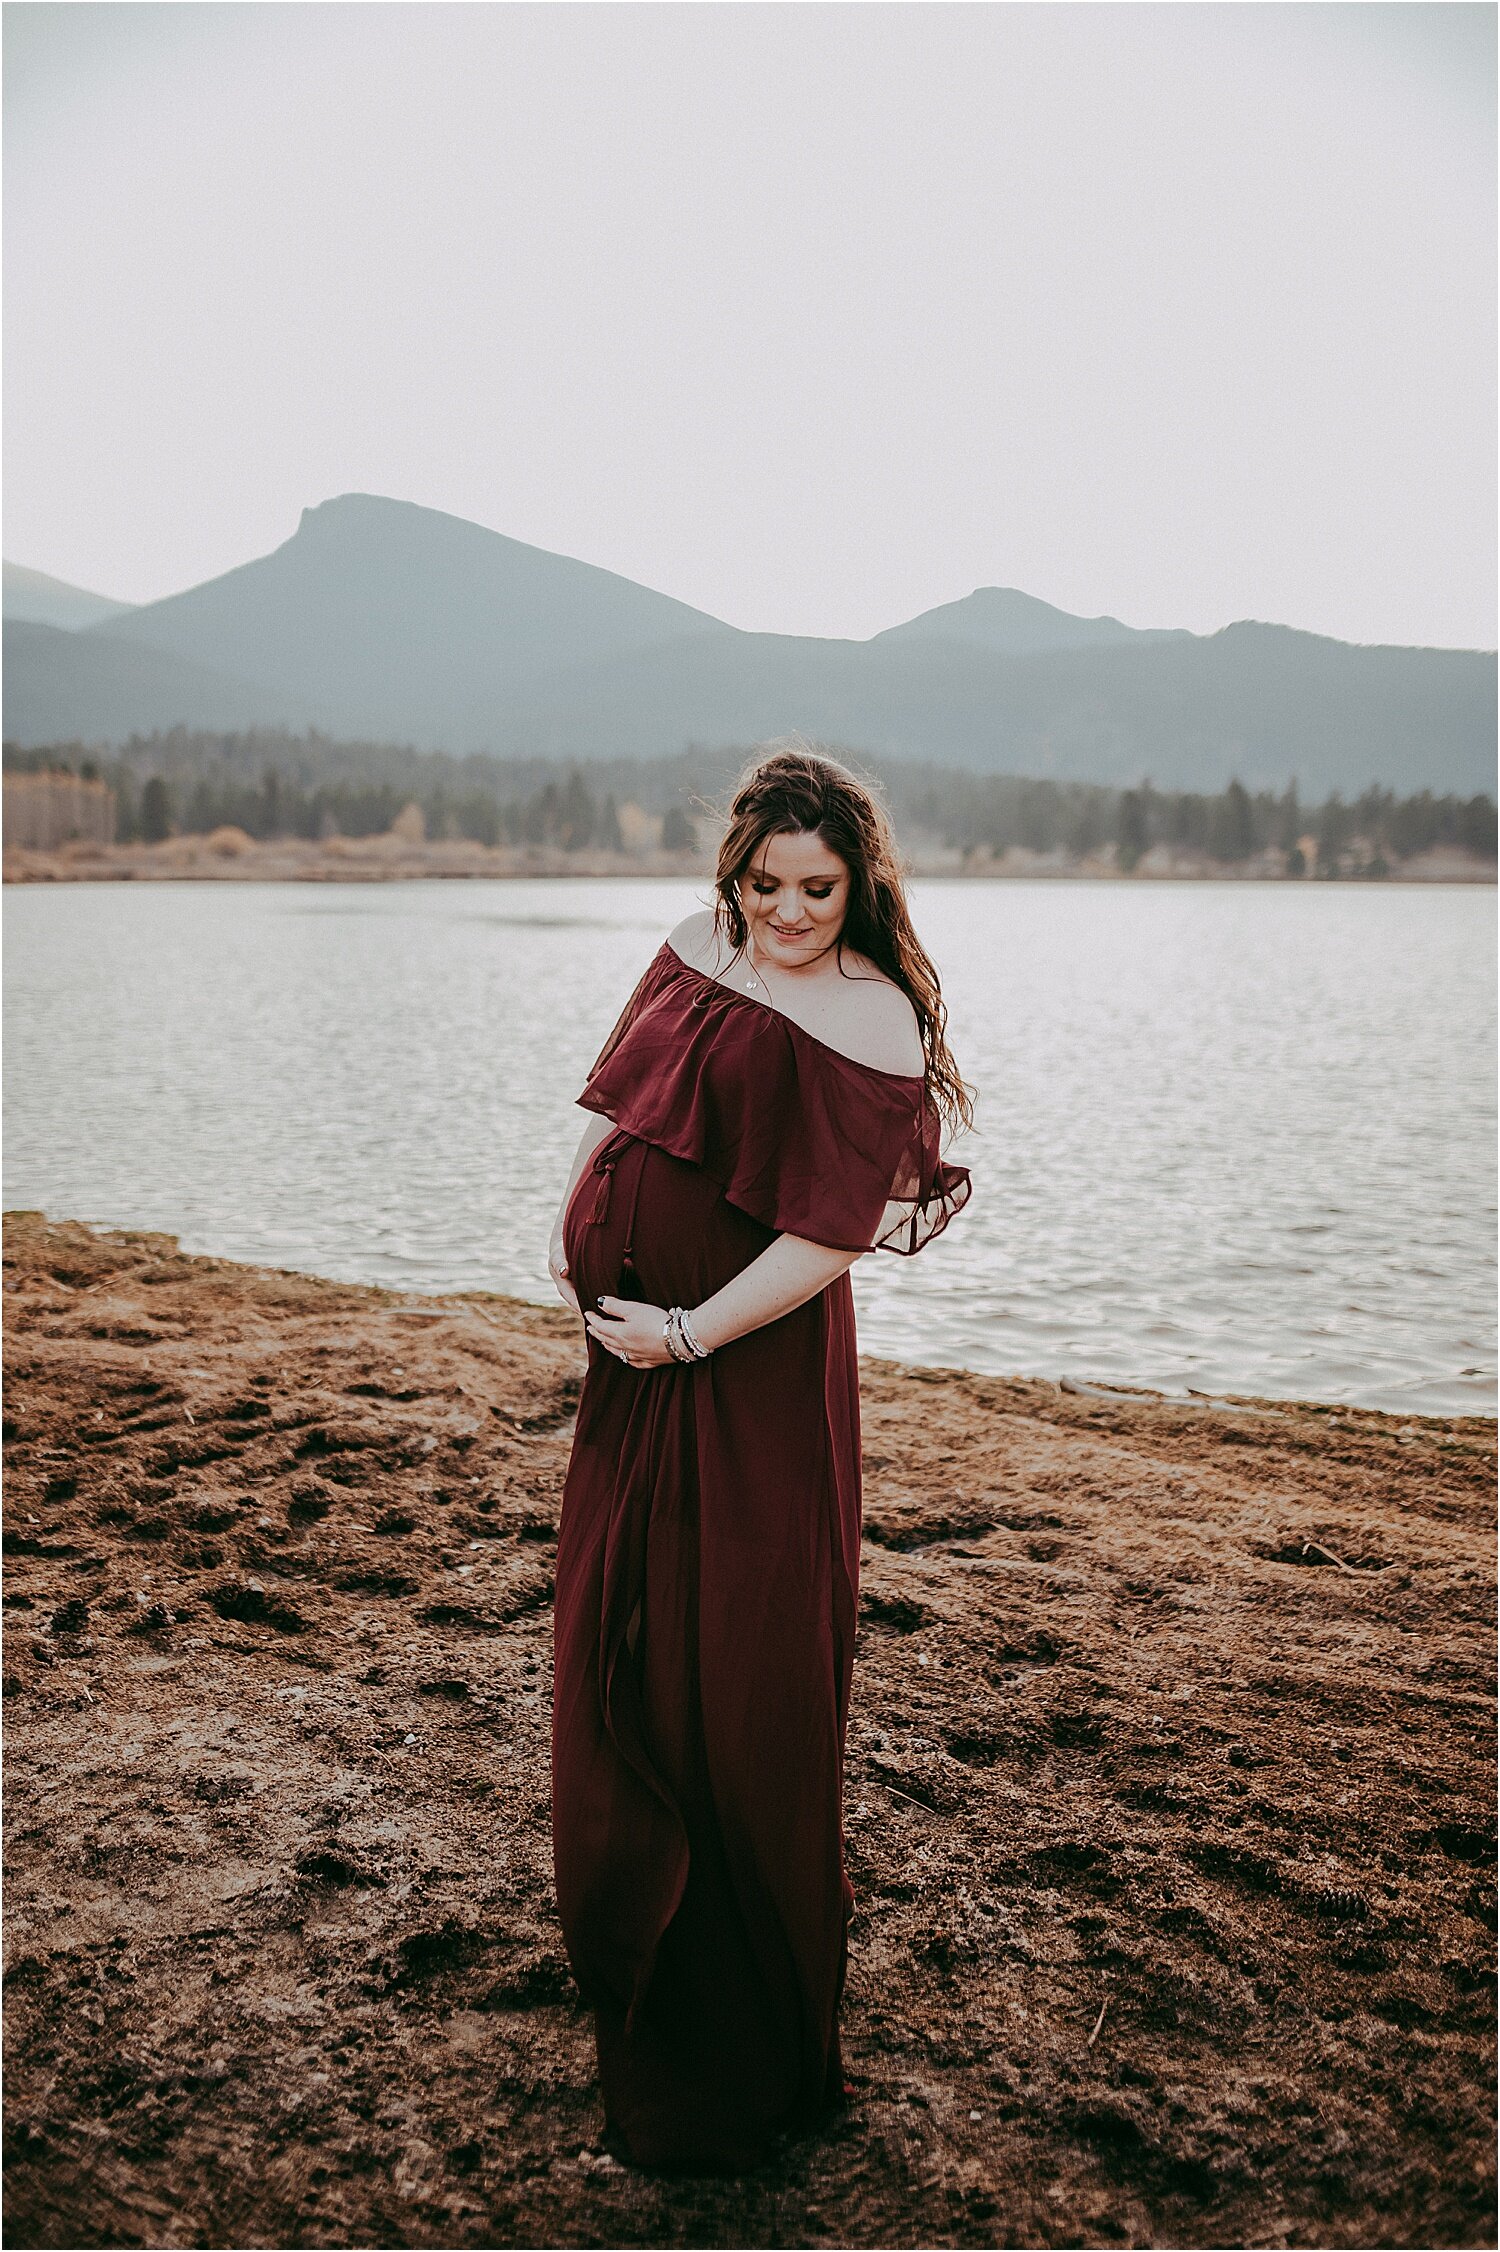 Lakeside Maternity Photographs in Estes Park Colorado by Sunshine Lady Photography